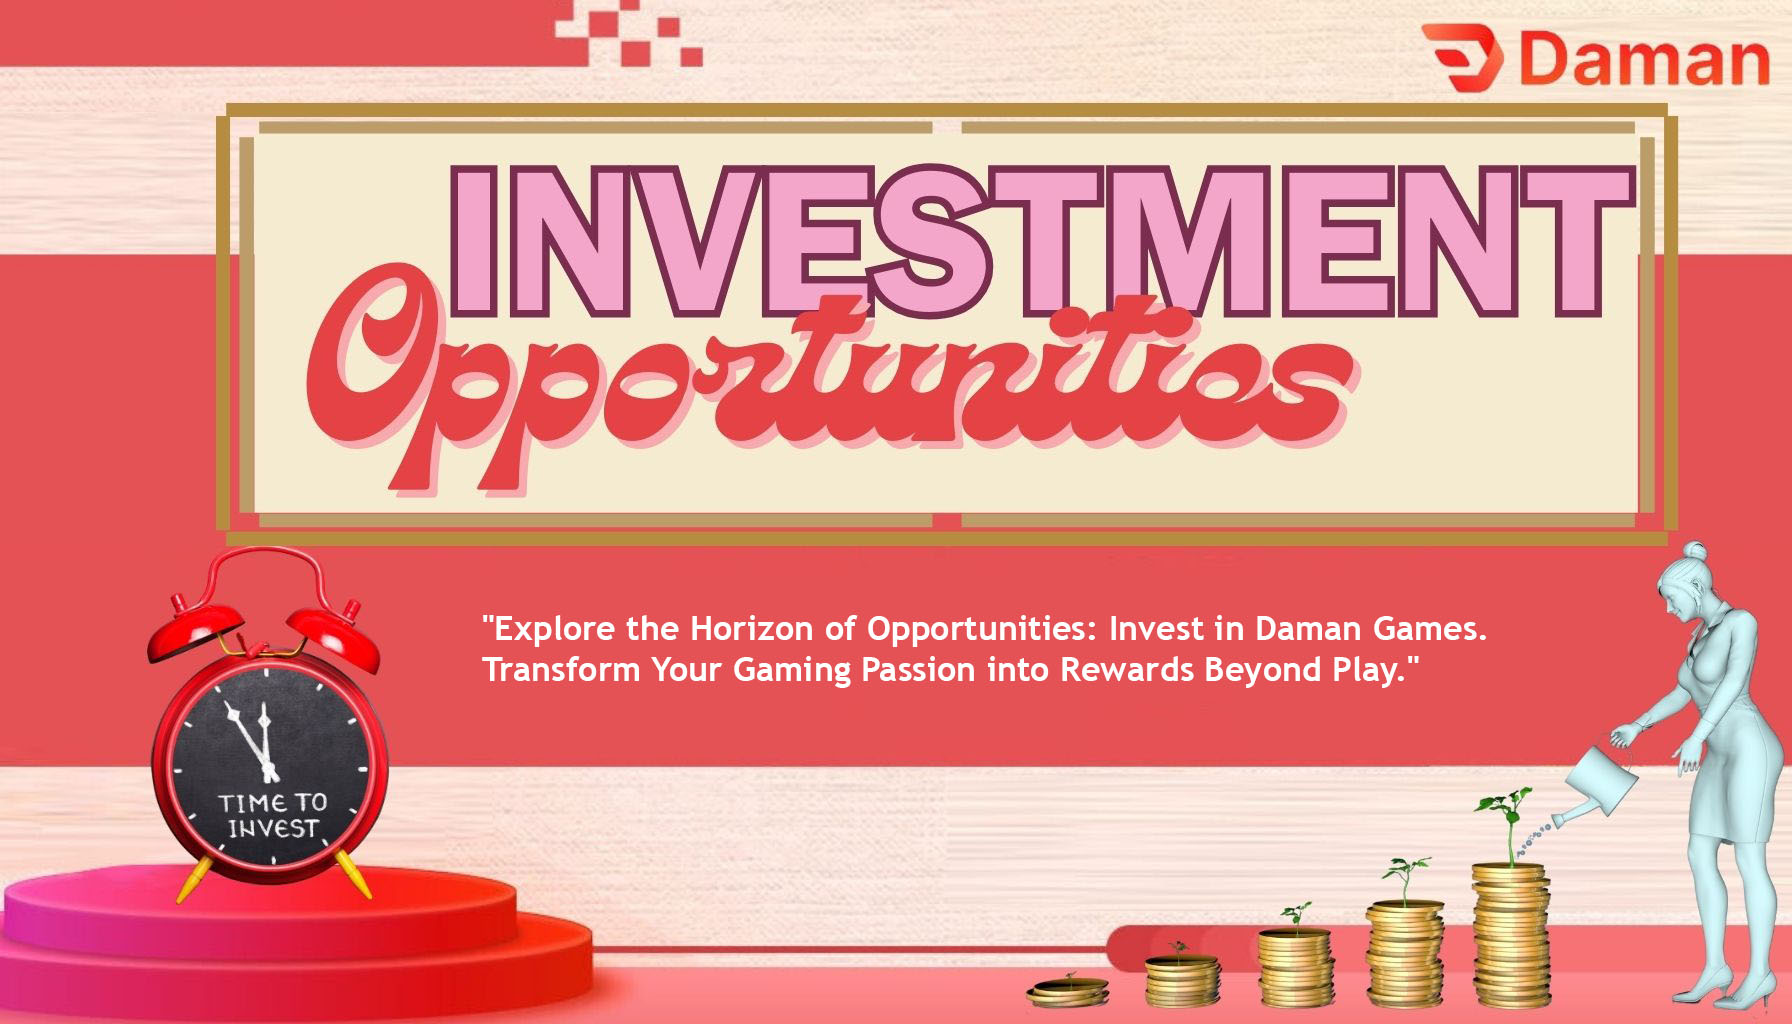 an image of daman games as an investment opportunities for every gamers